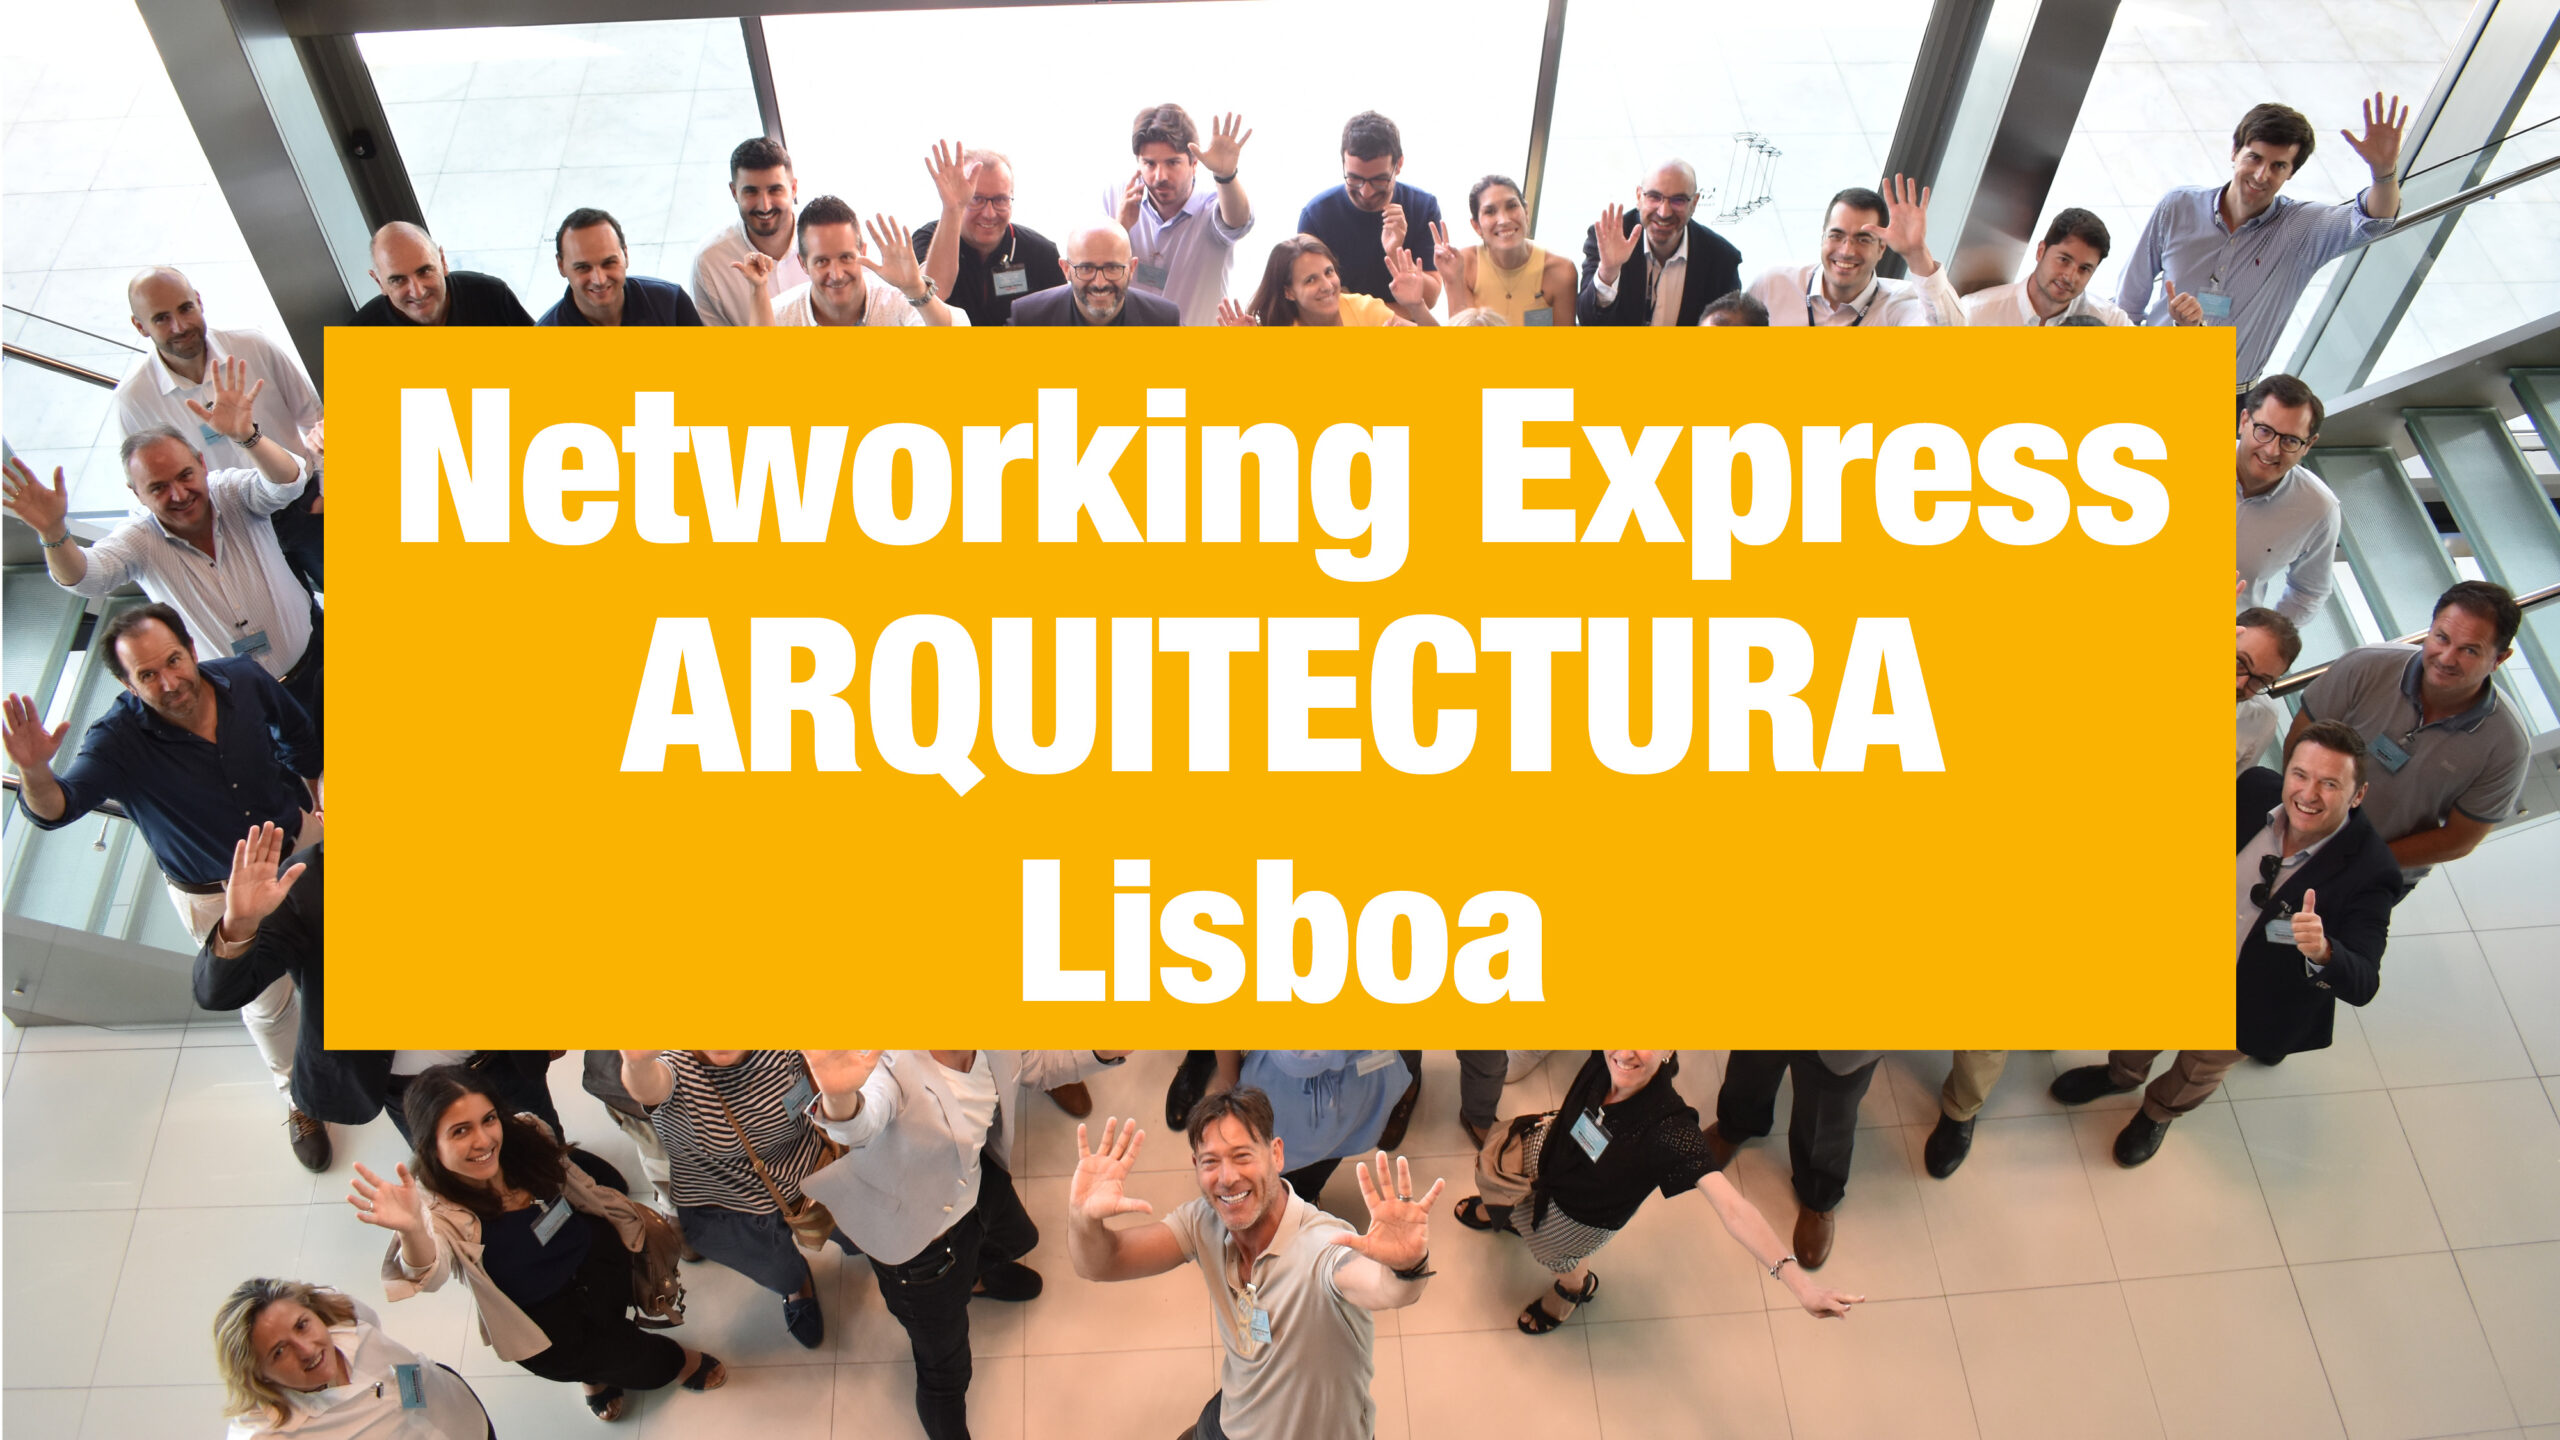 PLANTILLA BANNERS NETWORKING ARQUITECTURA LISBOA V3 scaled